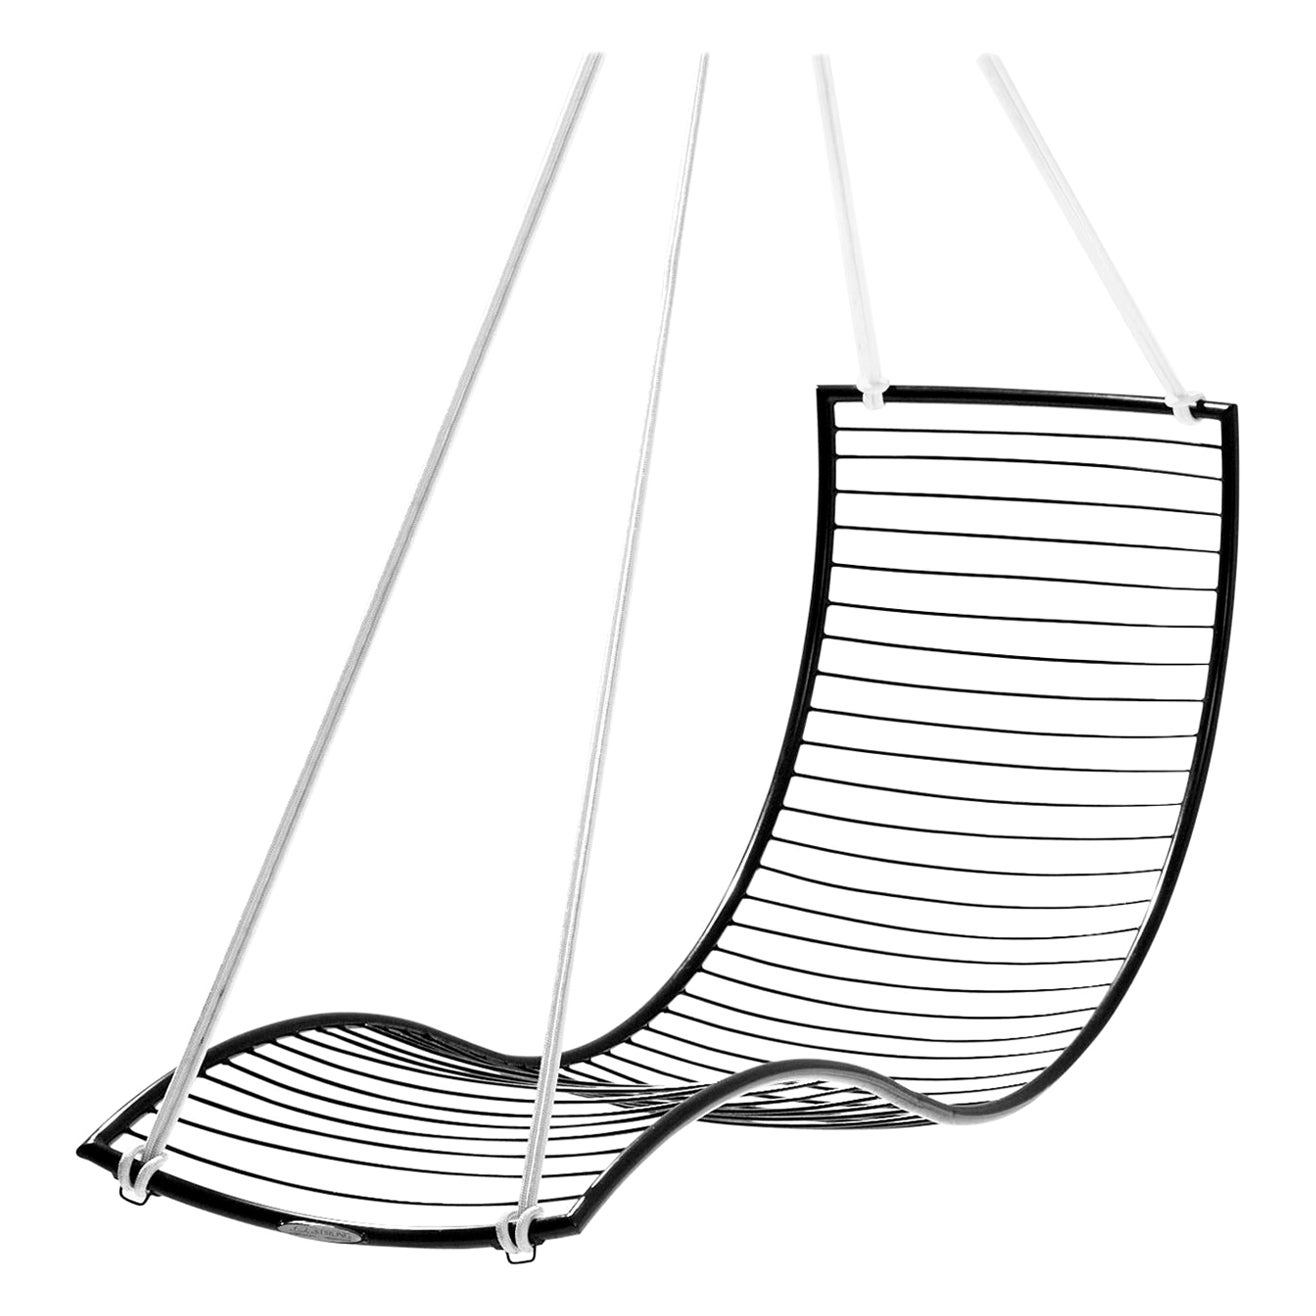 Modern Steel in/outdoor Curve Hanging Chair Black 21st Century Lounger Daybed